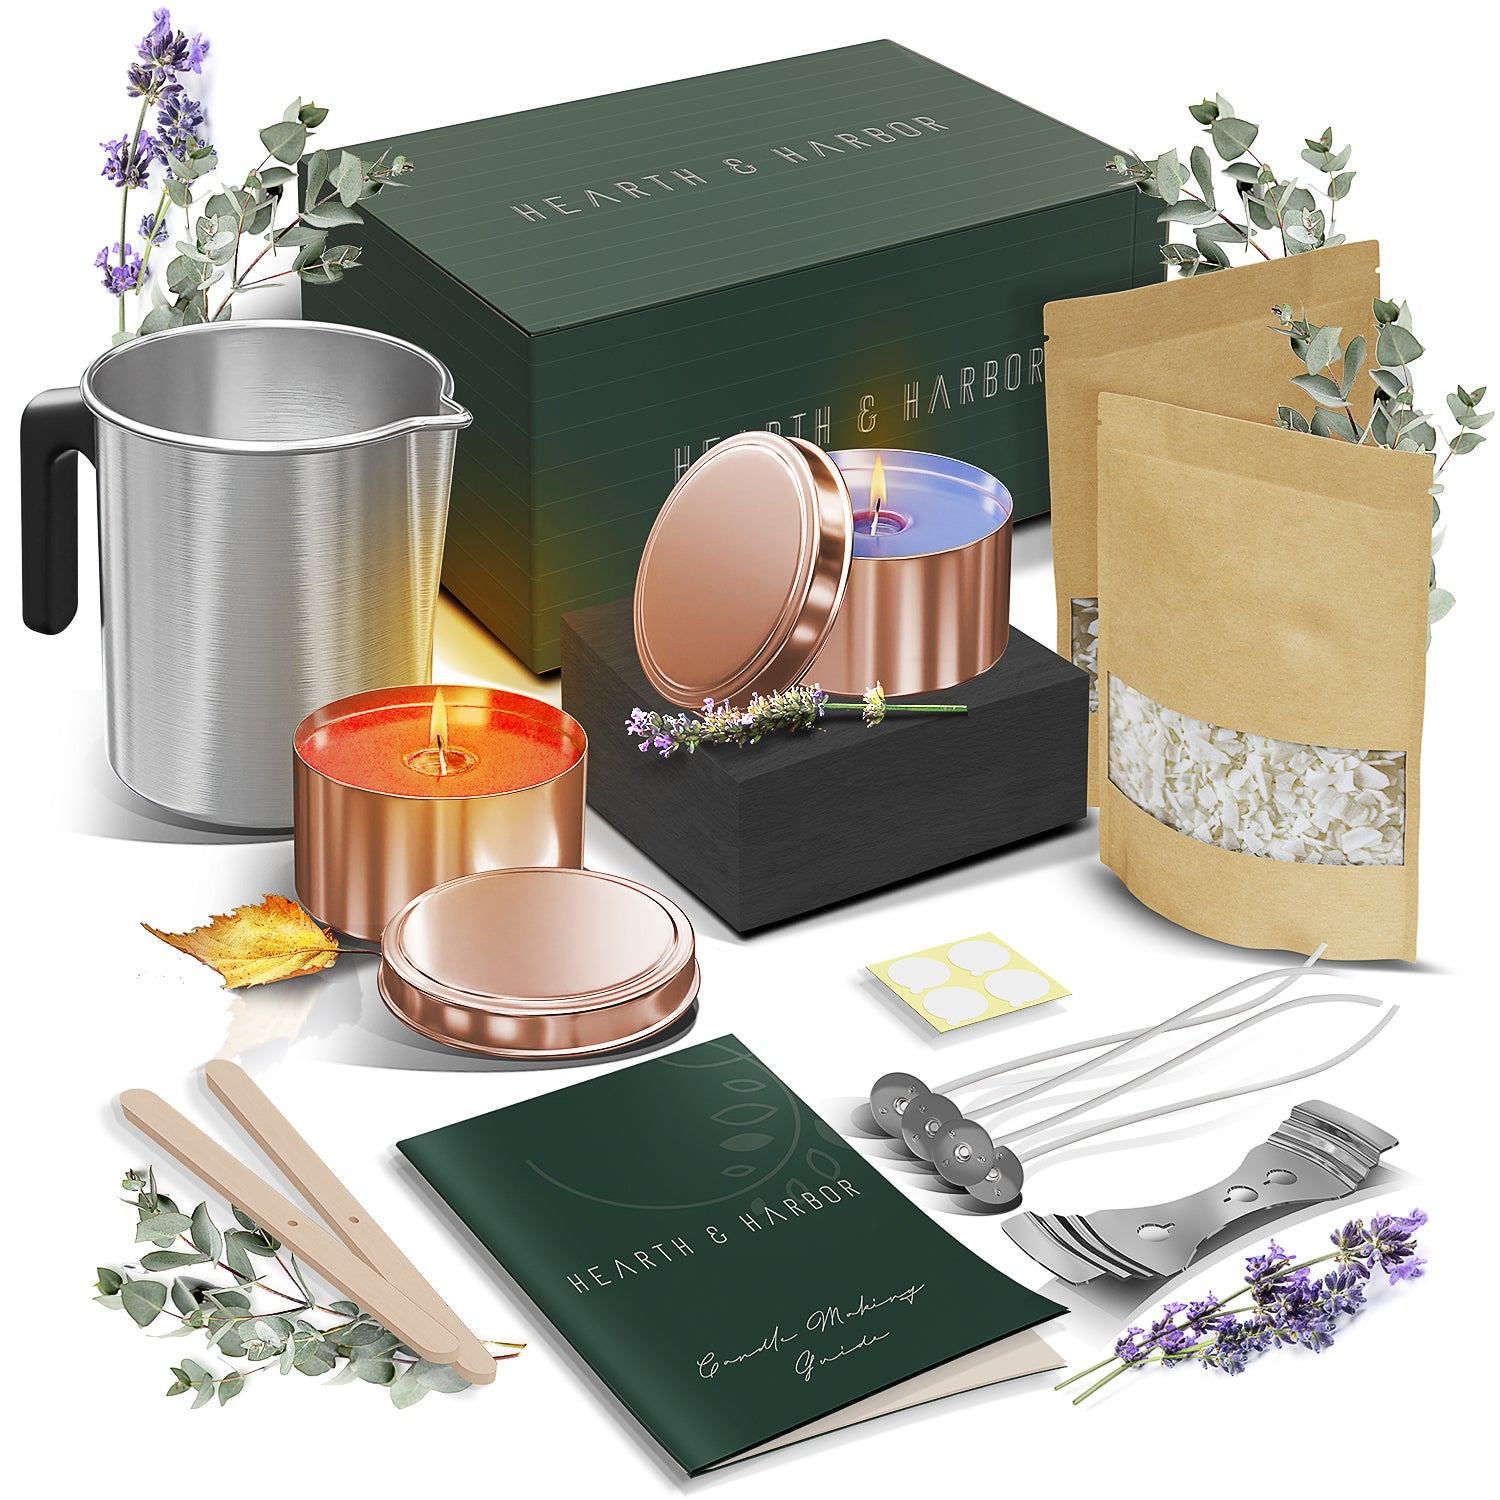 Up To 51% Off on Hearth & Harbor Candle Making